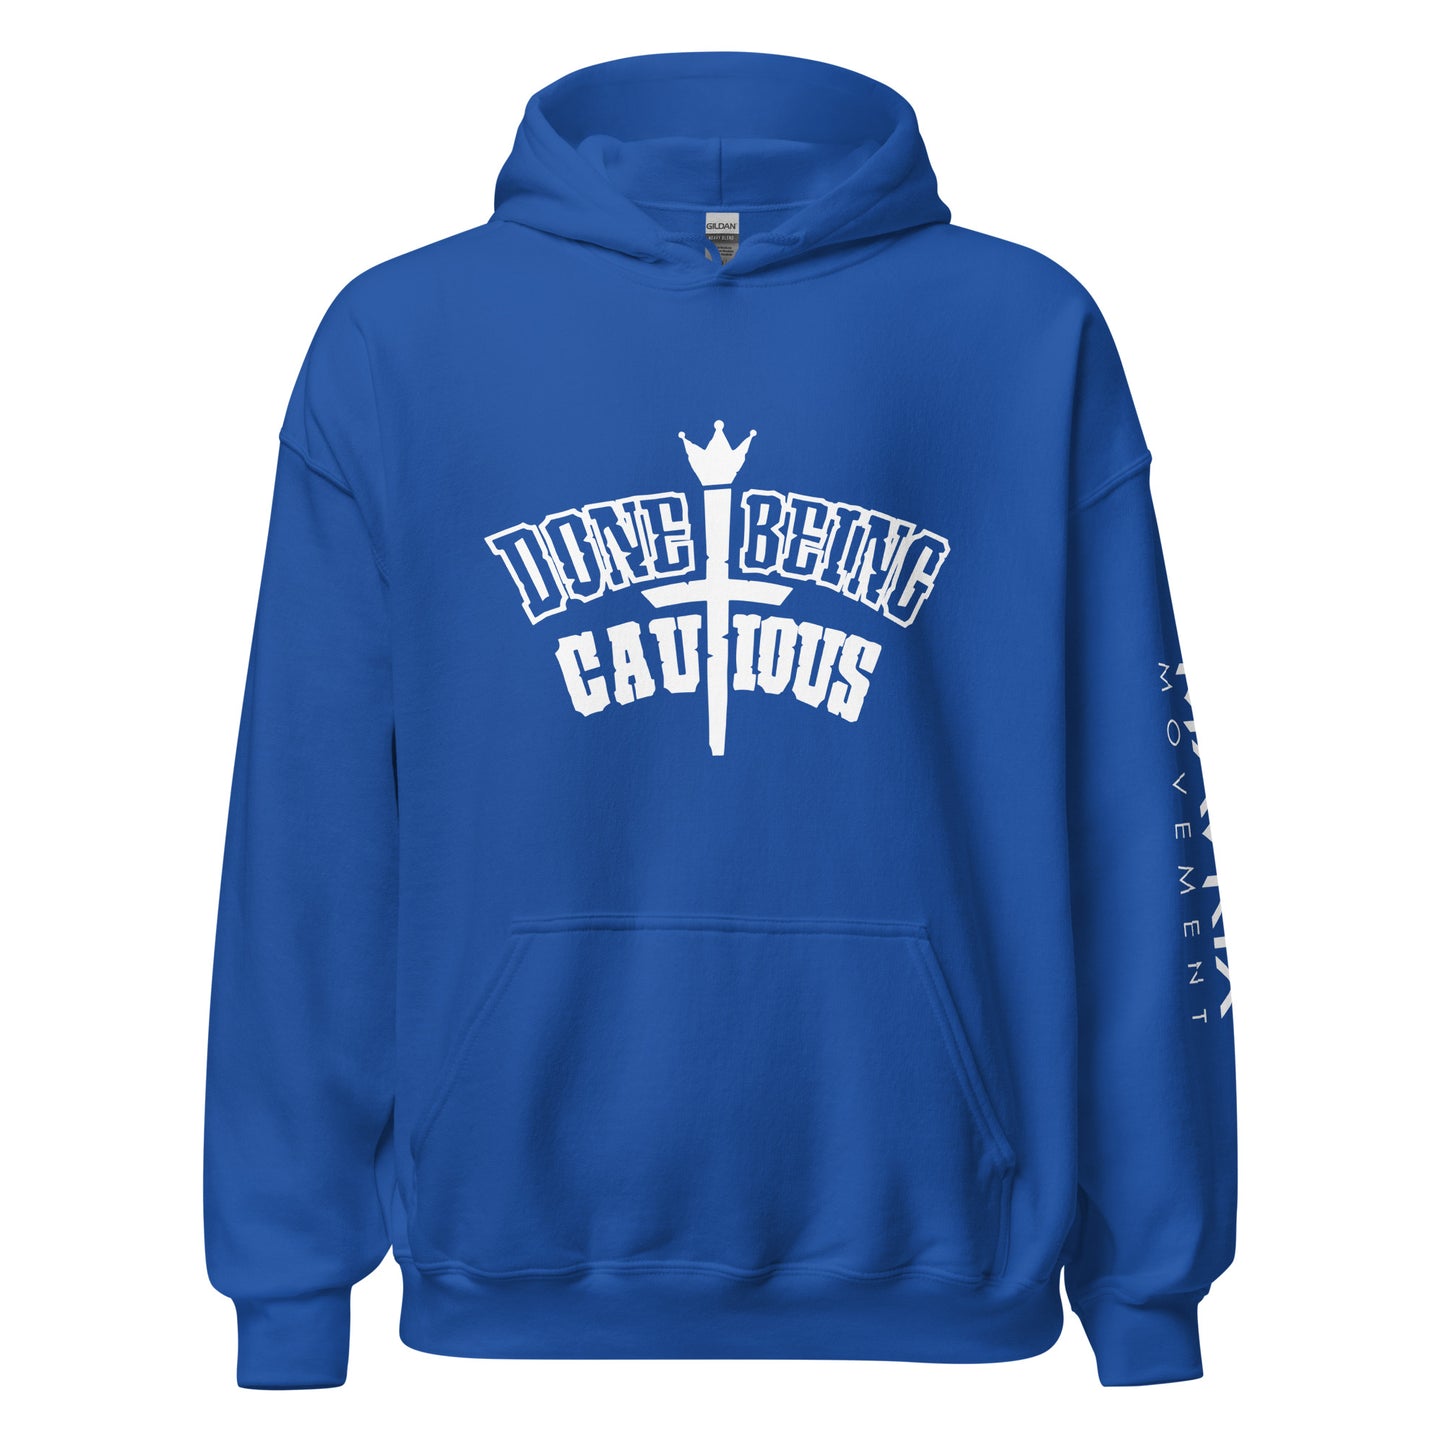 Done Being Cautious Signature Monotone Hoodie (7 colors)